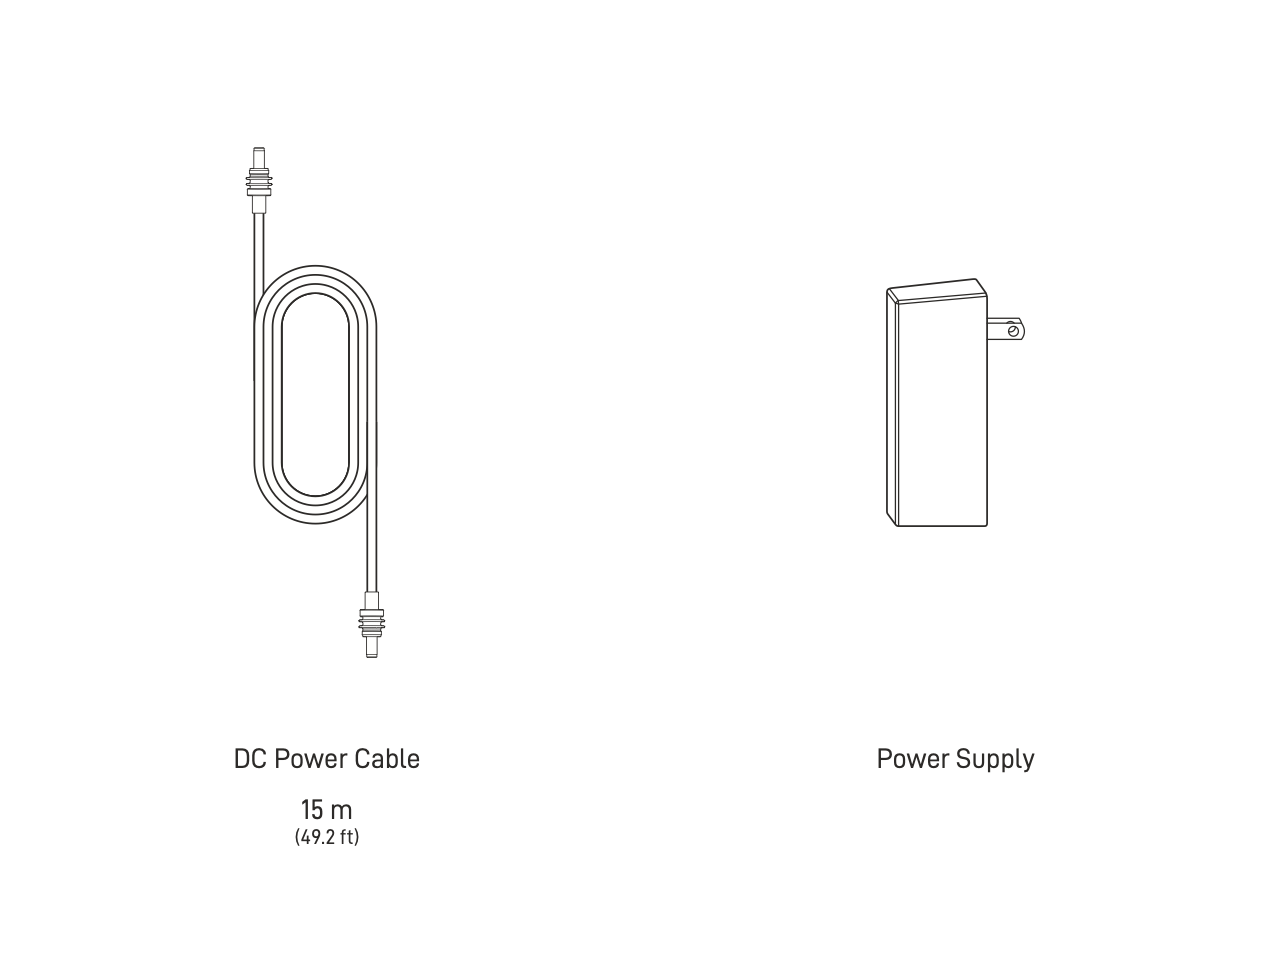 Starlink Mini DC cable and AC wall adapter